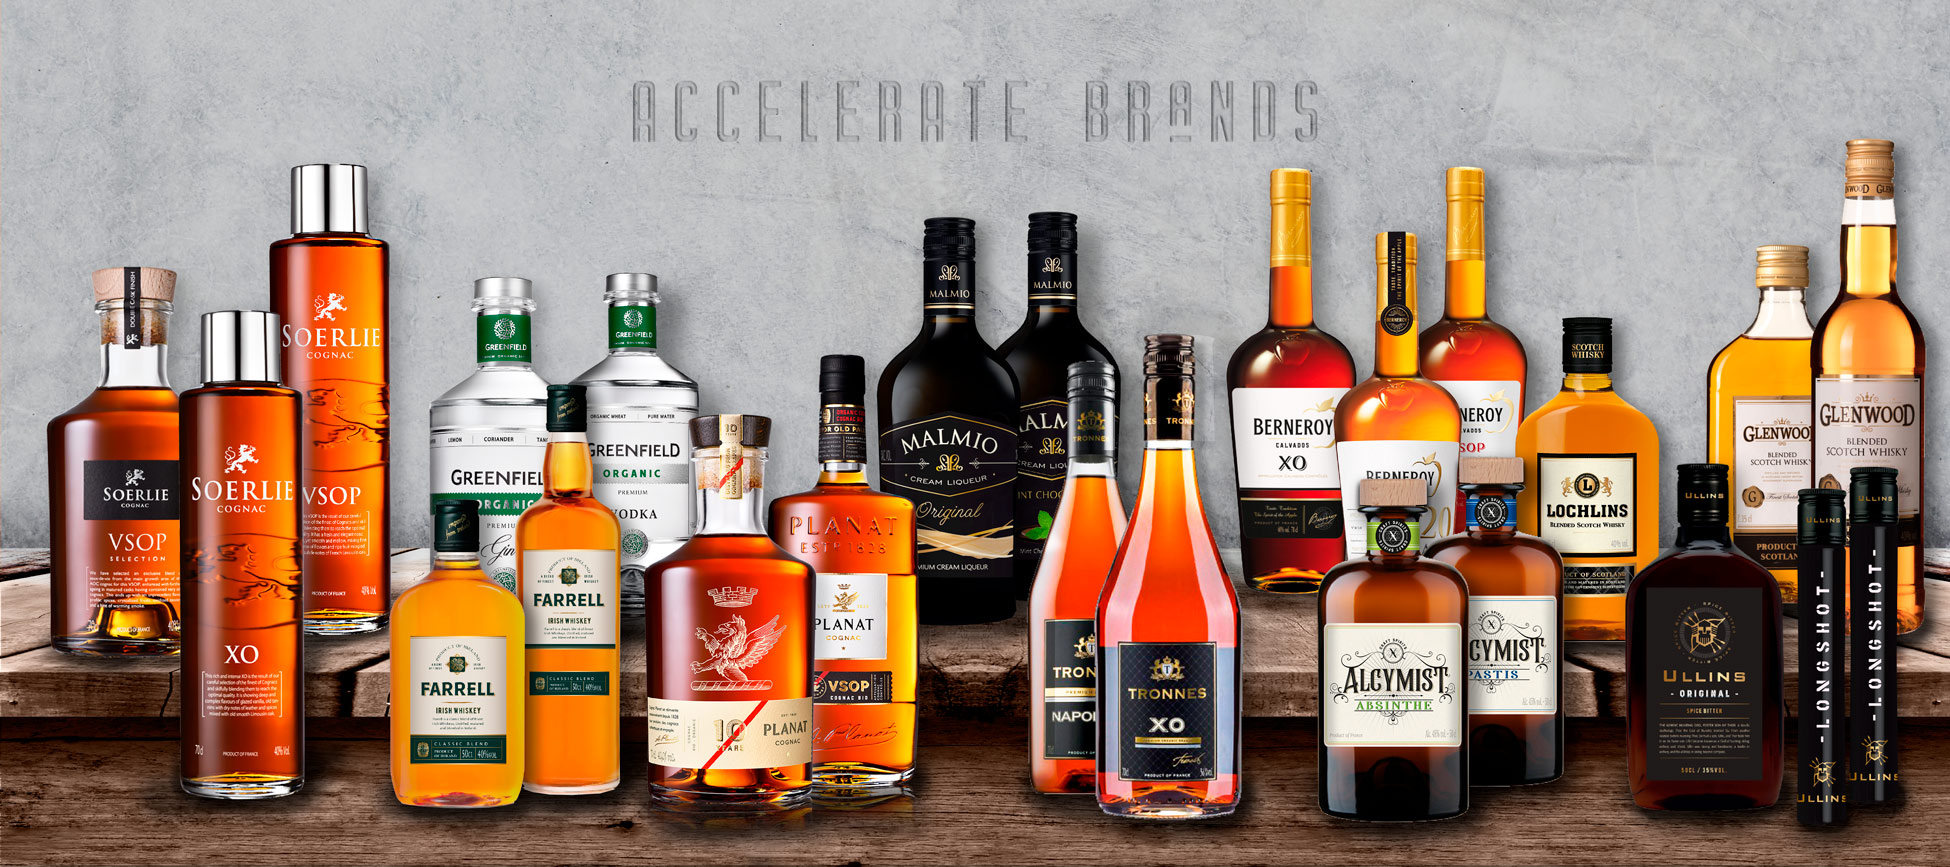 Accelerate Brands range of products